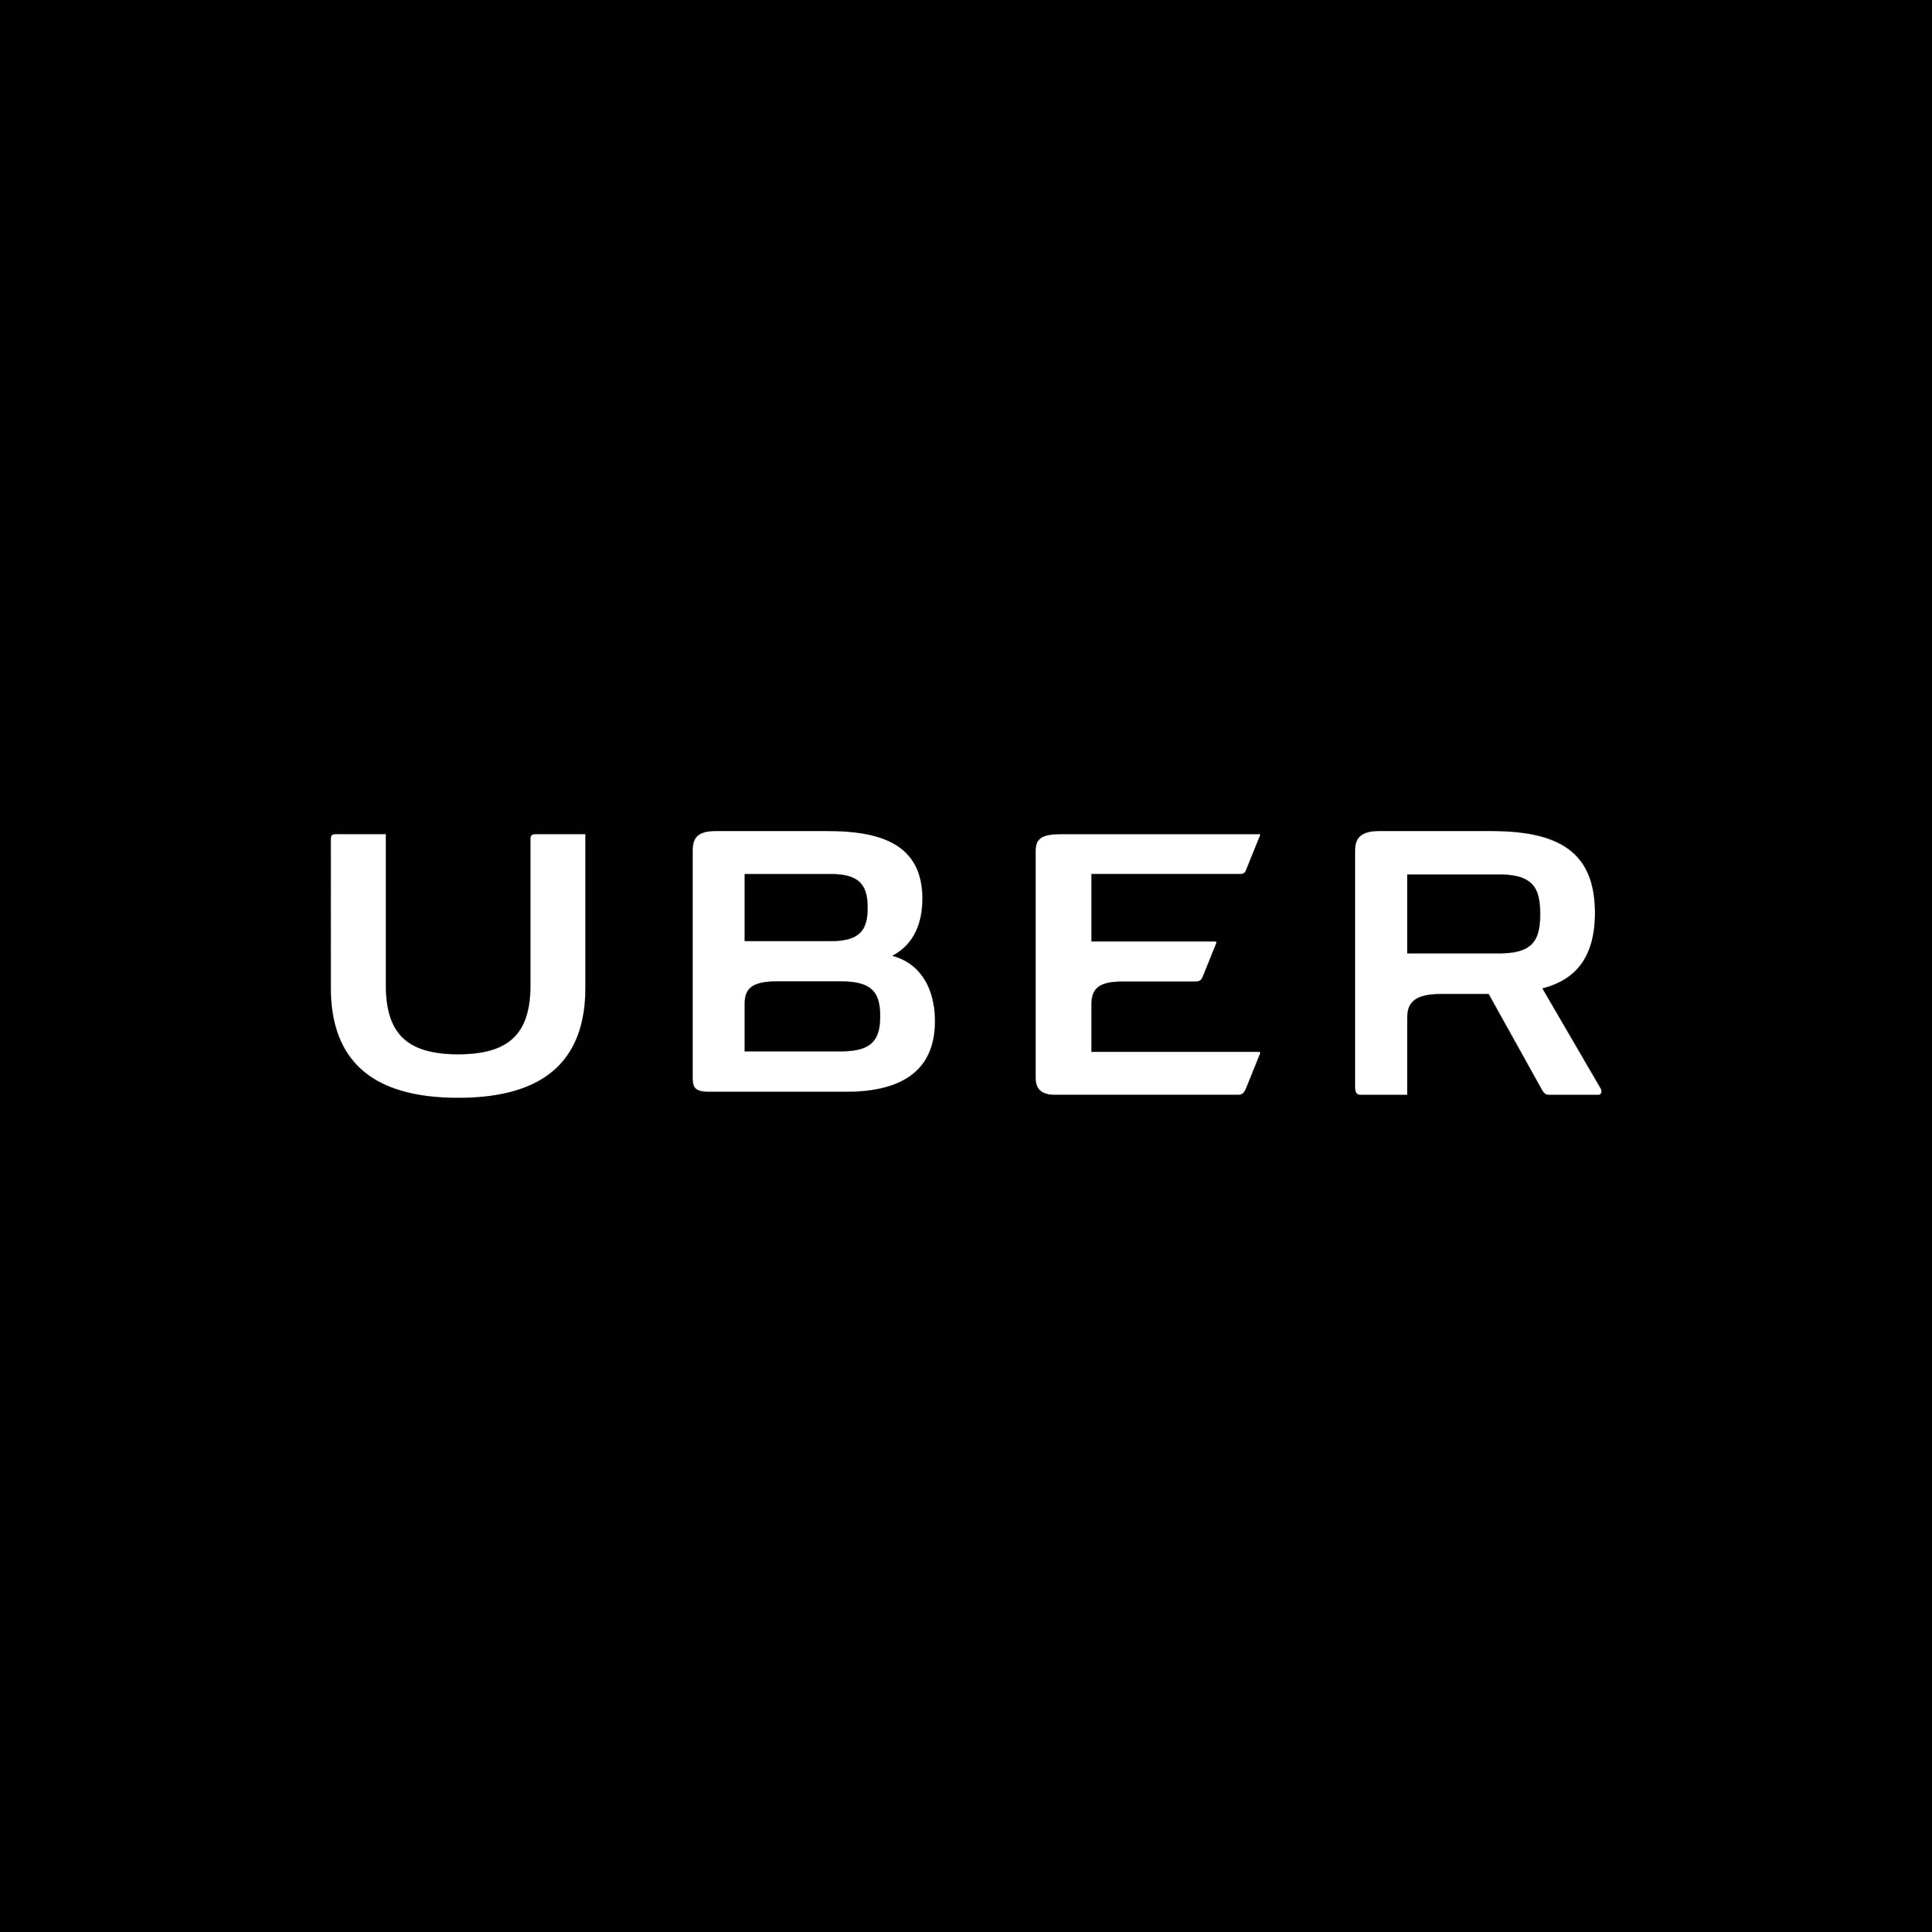 UBER Snapdeal Offer - Get Rs 100 Off On Booking UBER With Snapdeal